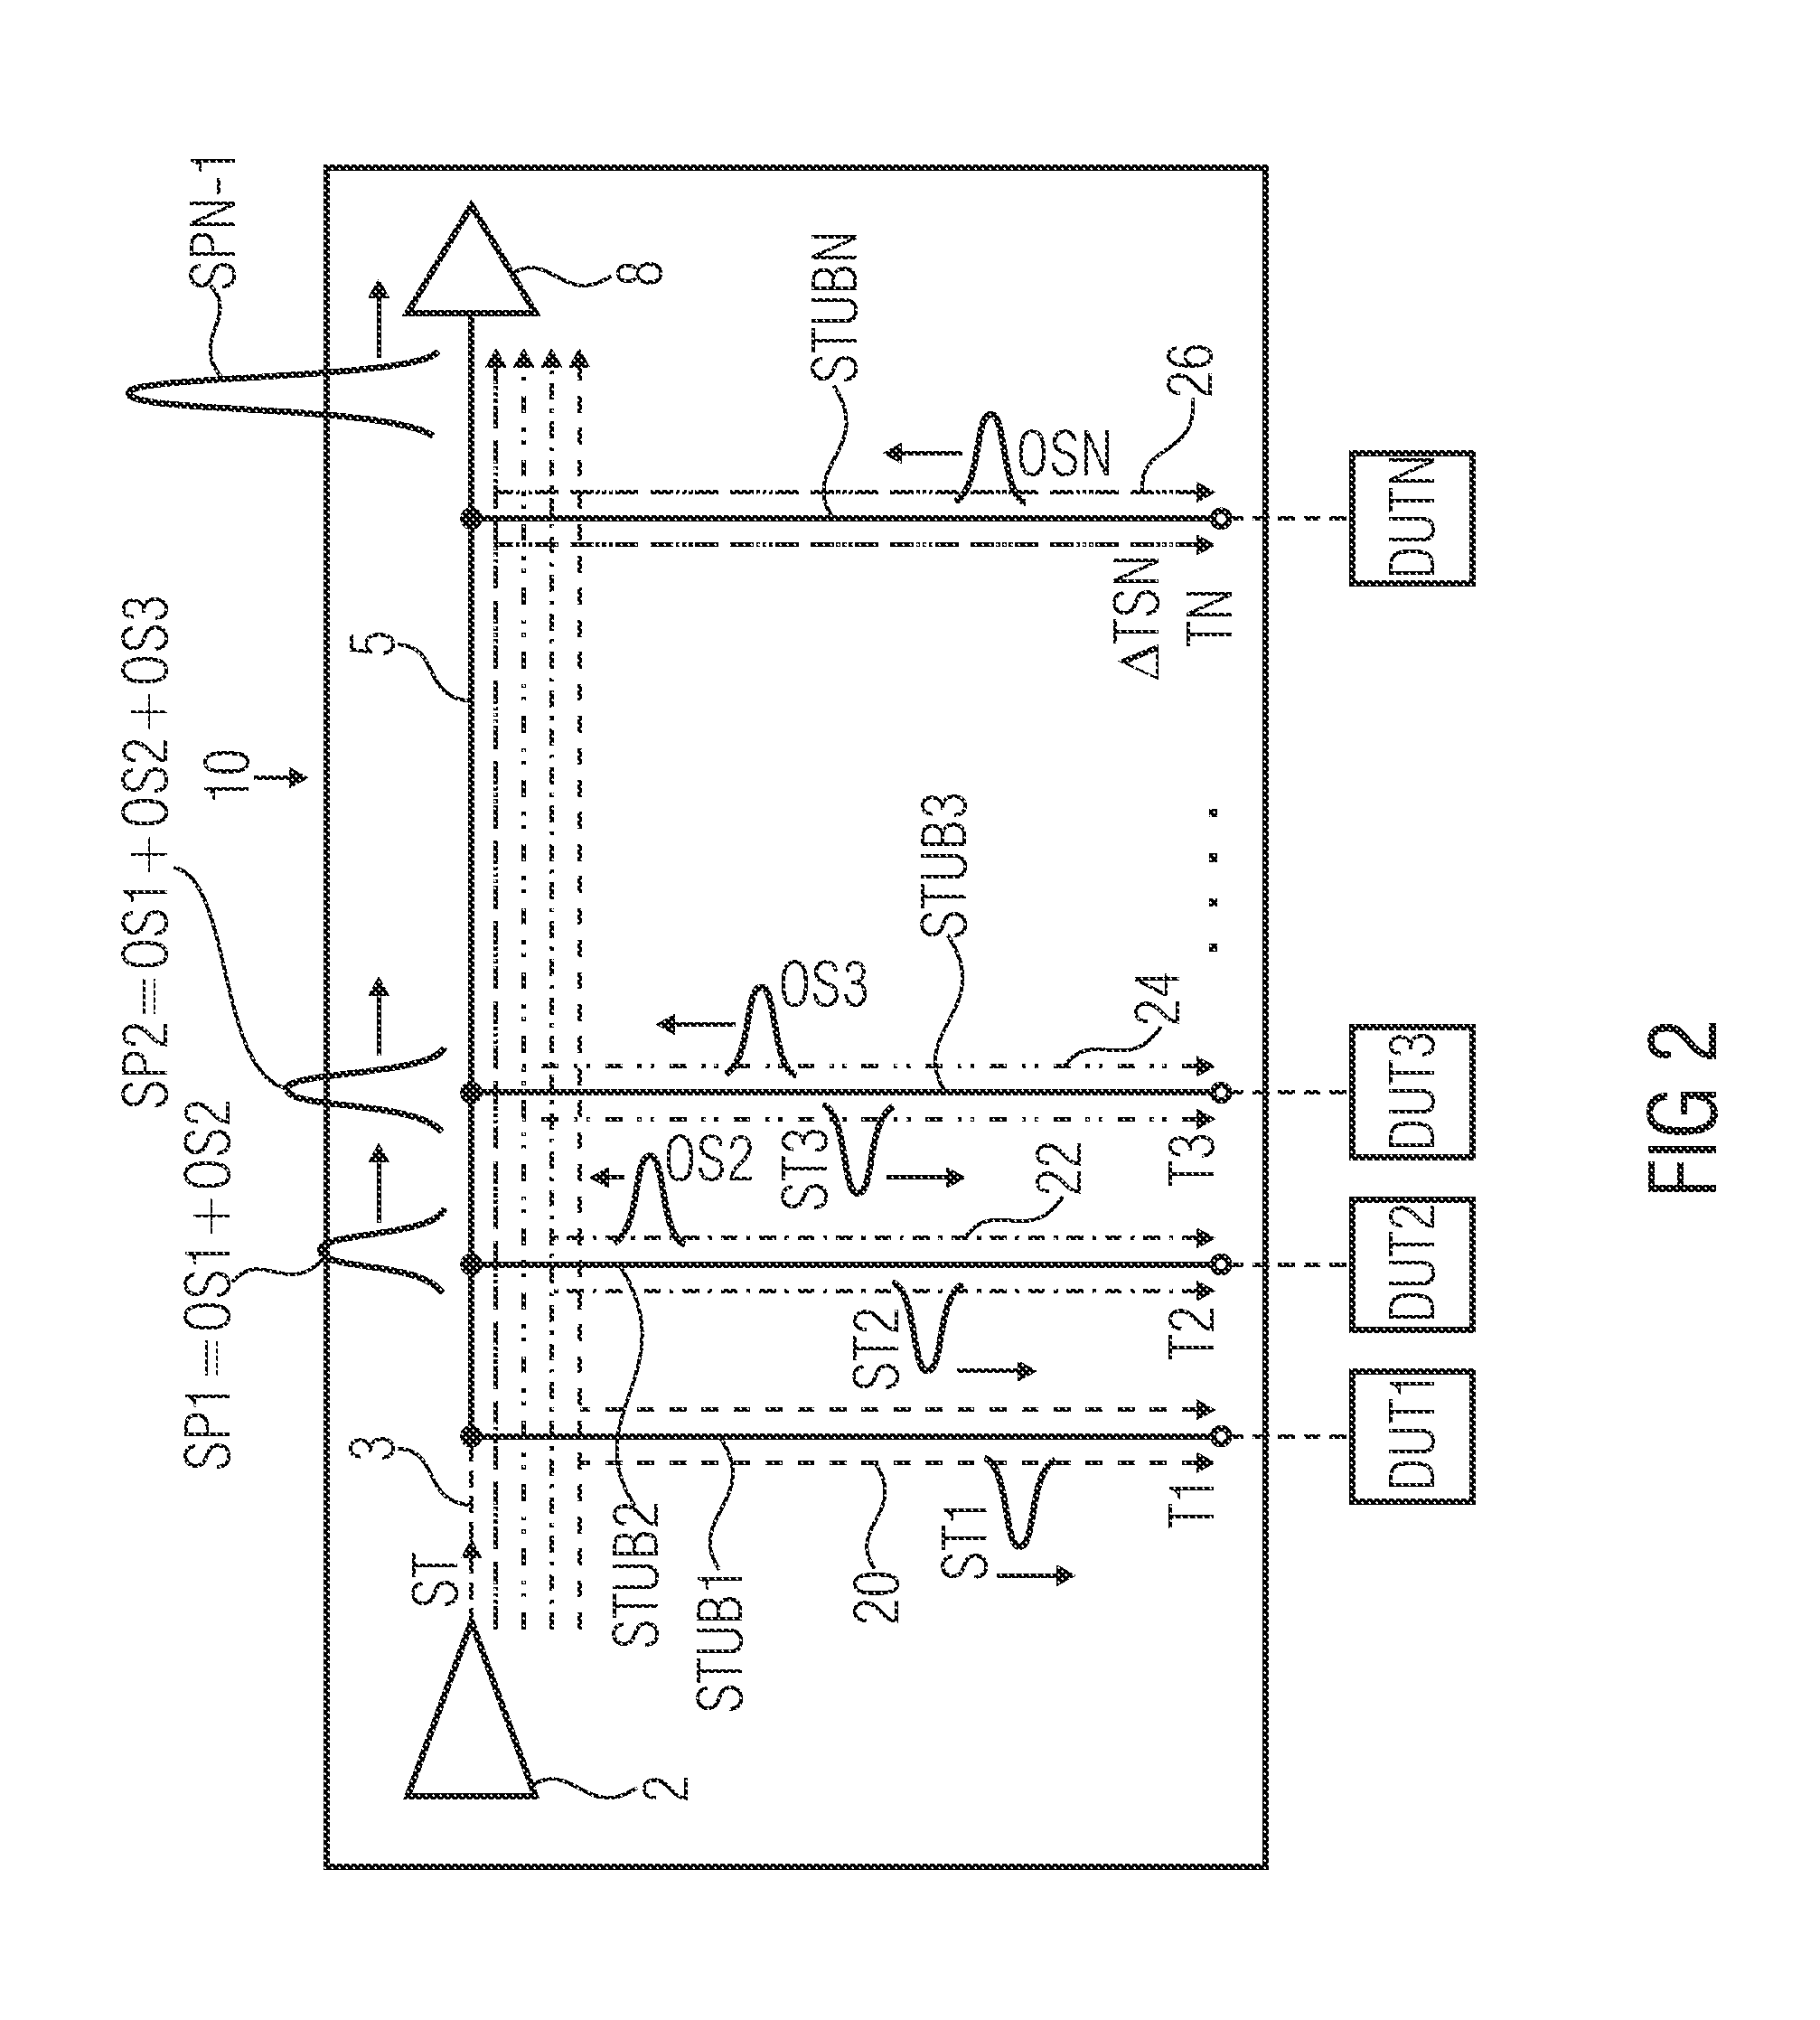 Apparatus and method for testing a plurality of devices under test